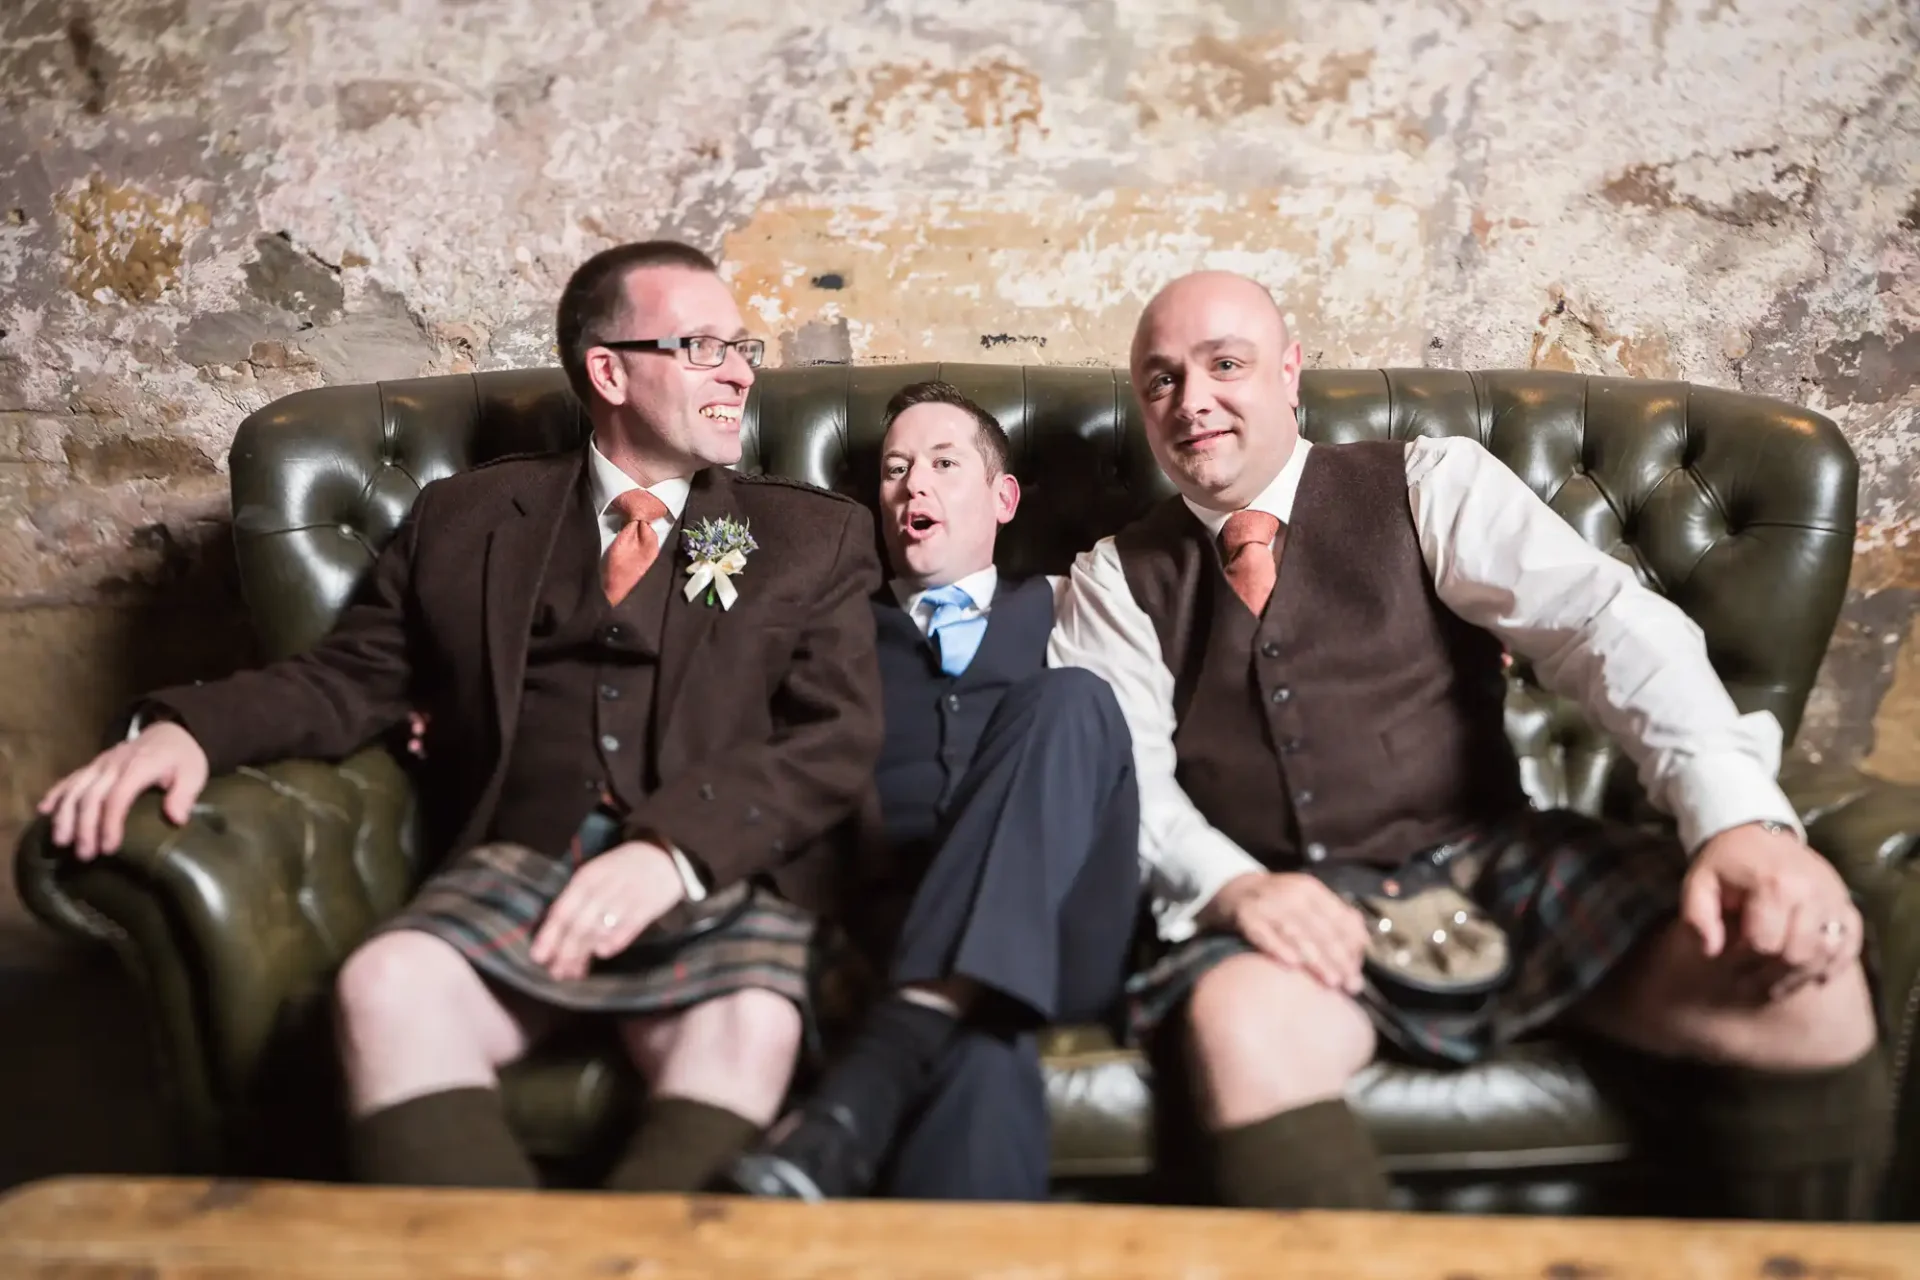 Three men in kilts and vests sitting on a leather sofa laughing, one with a visible wedding boutonniere.